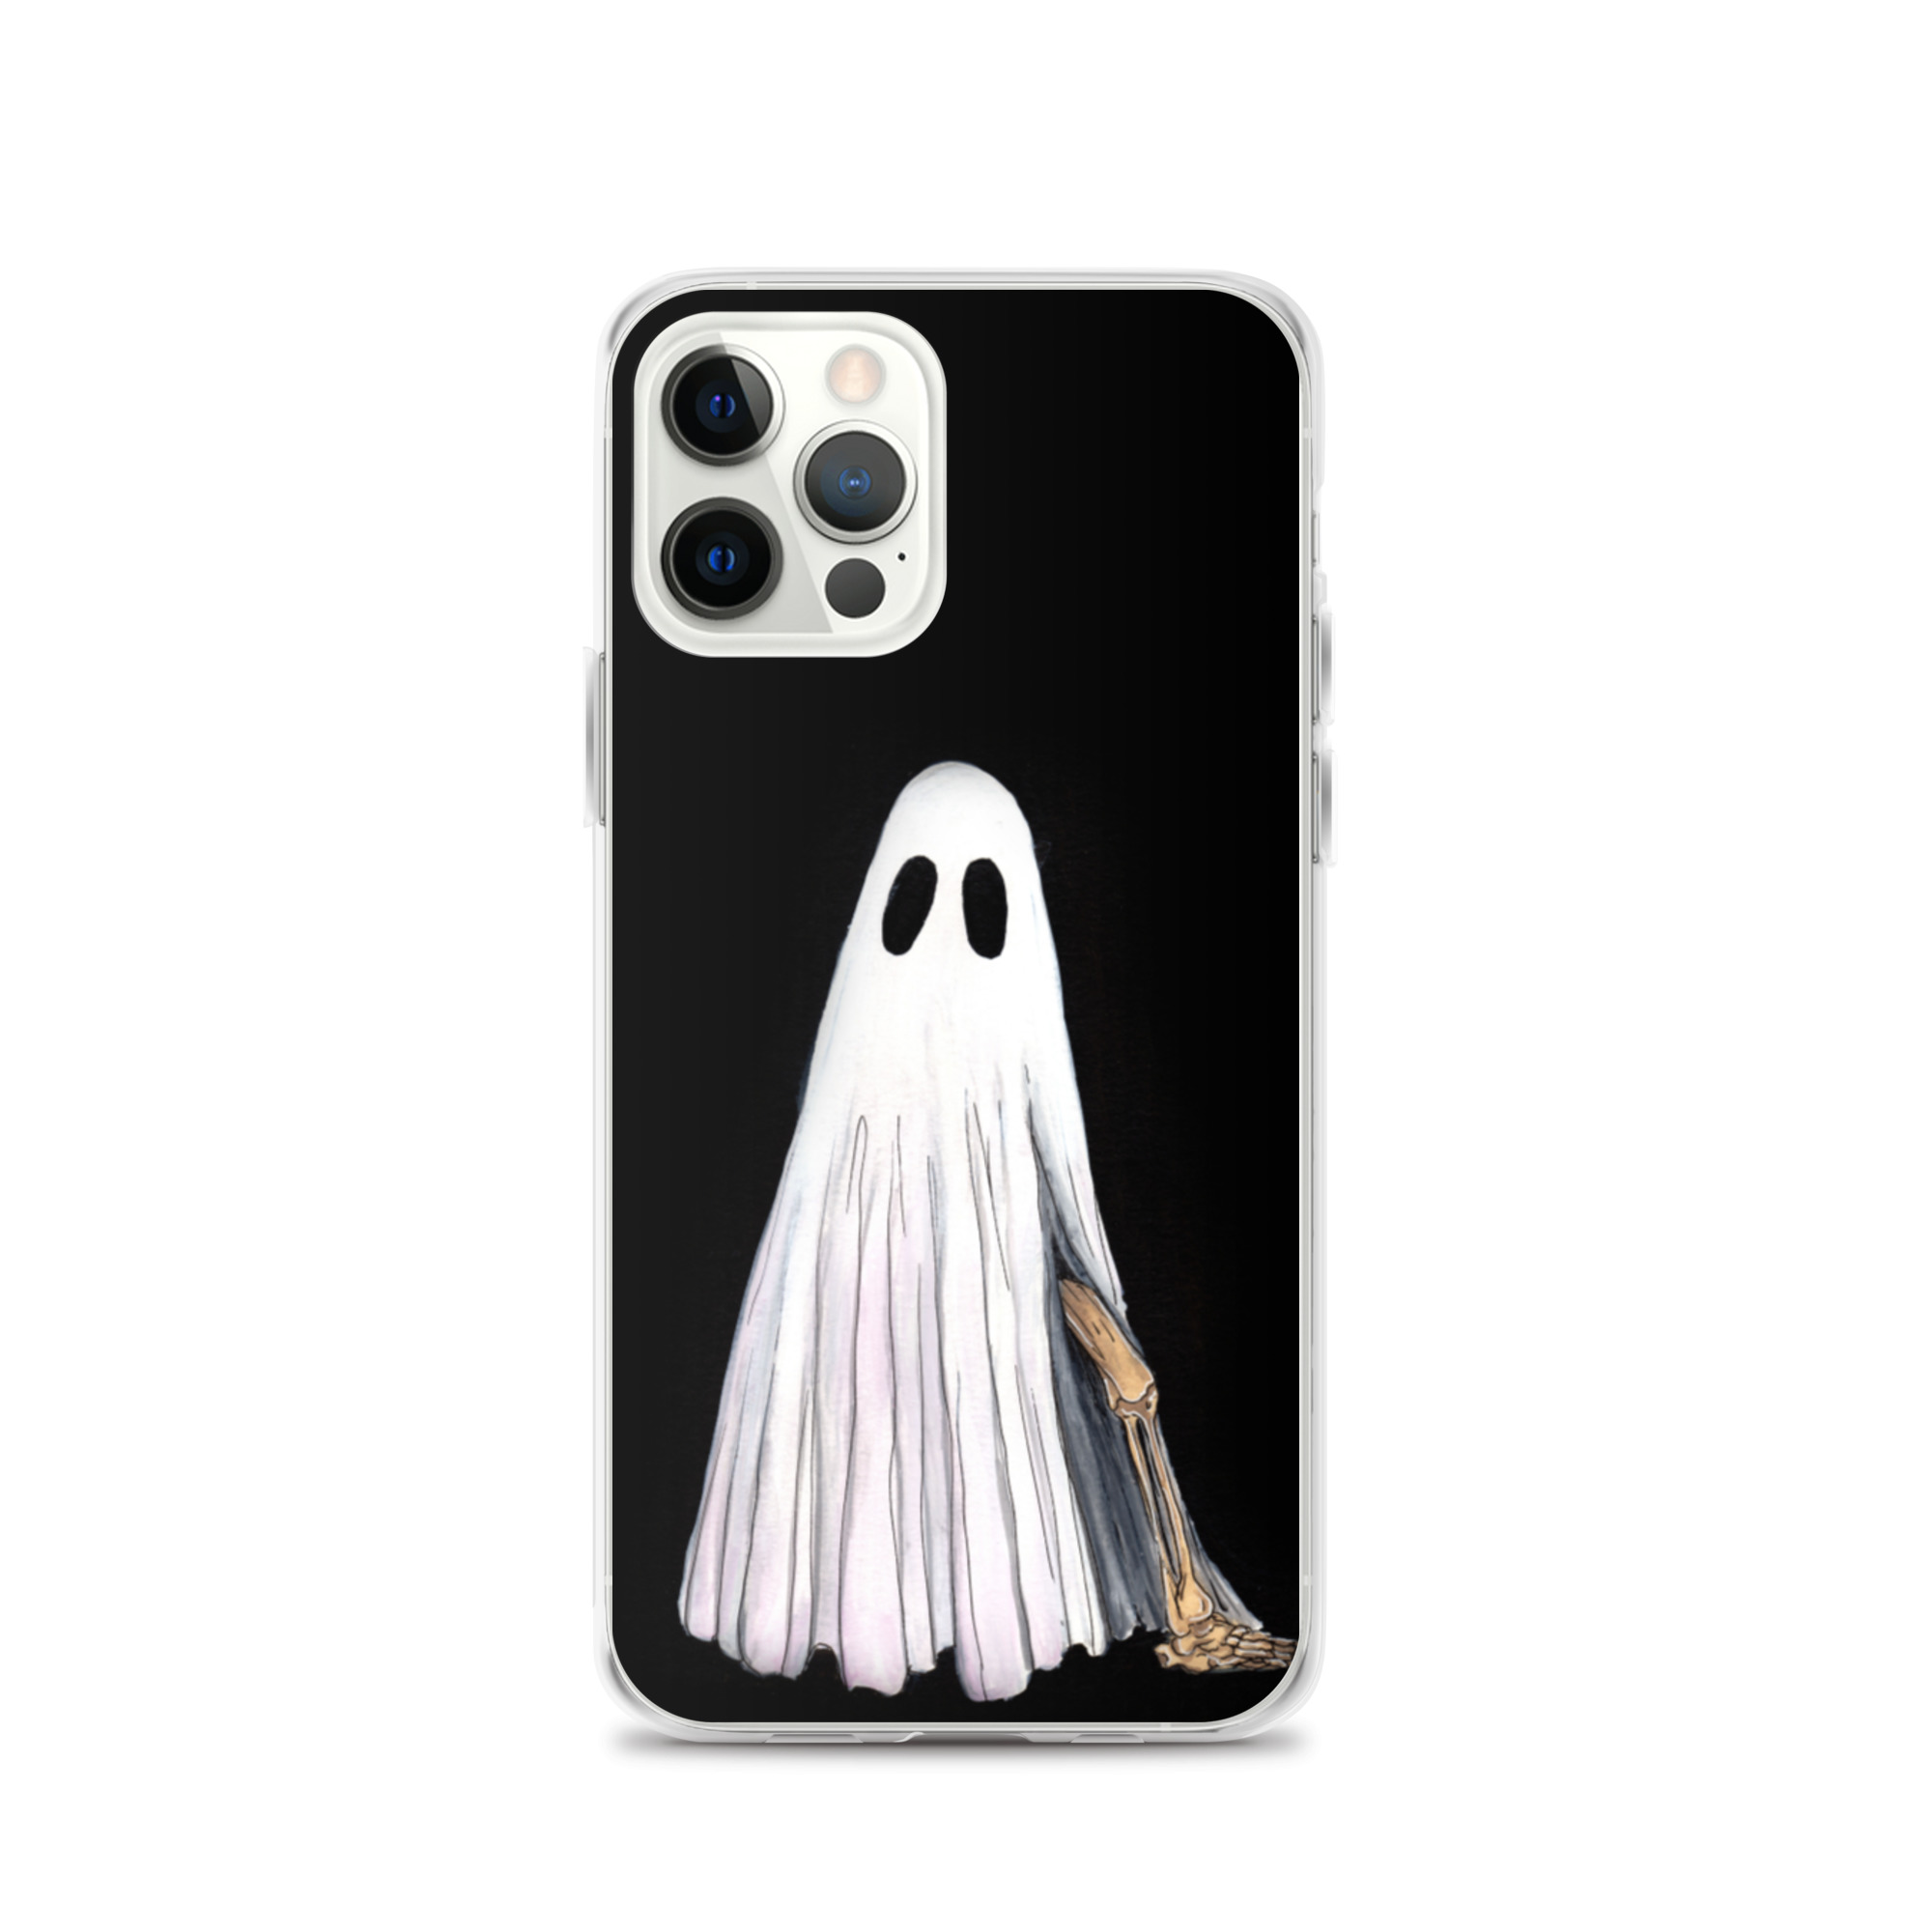 iphone-case-iphone-12-pro-case-on-phone-62eee678417a1.jpg